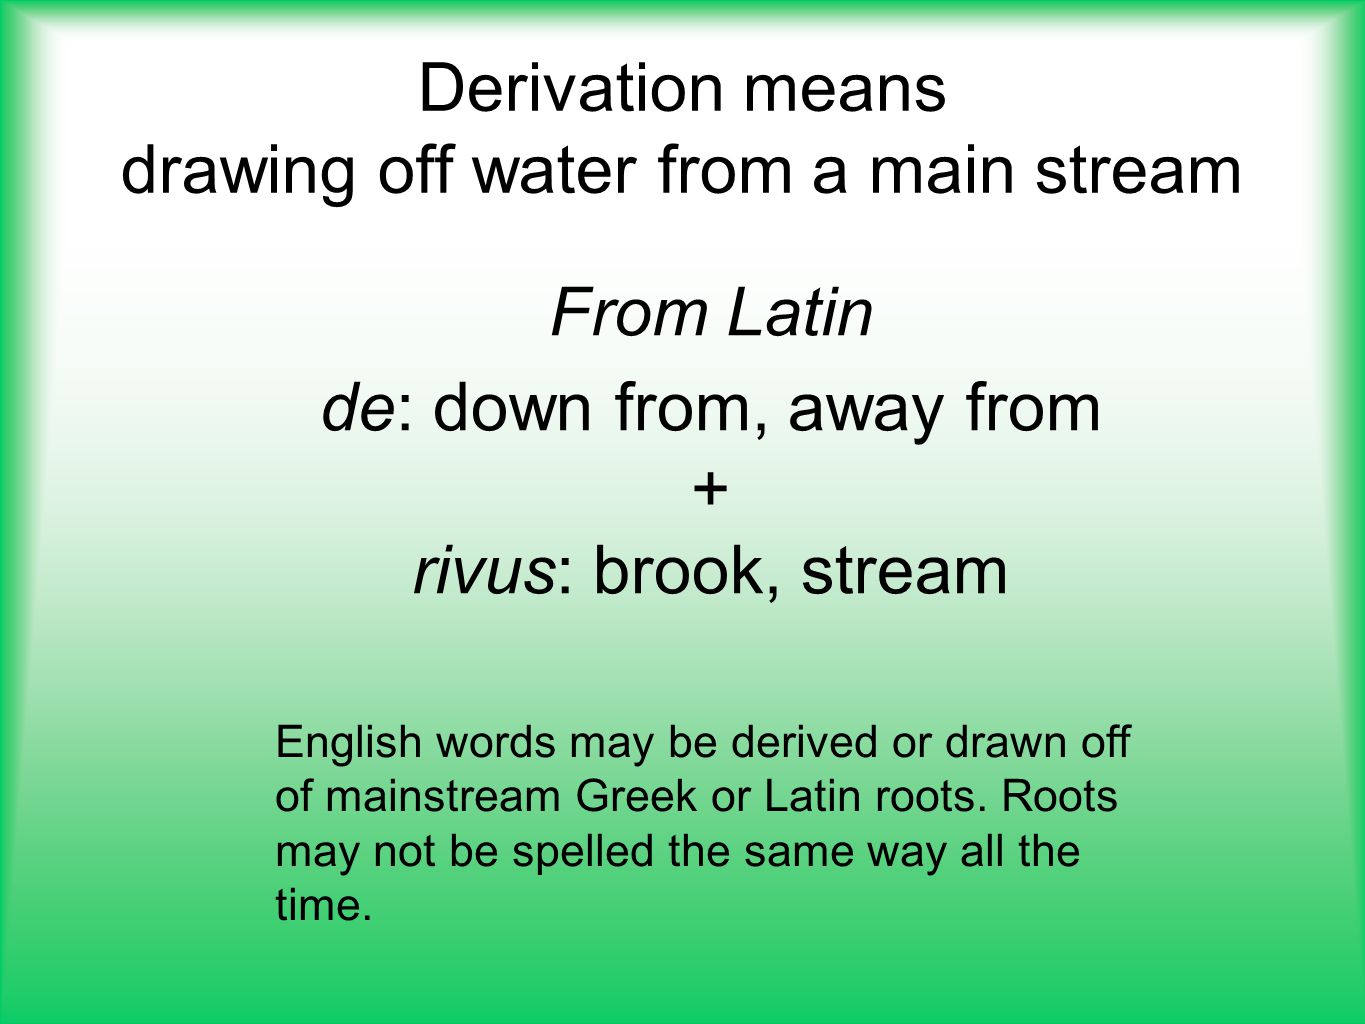 Derivation means drawing off water from a main stream